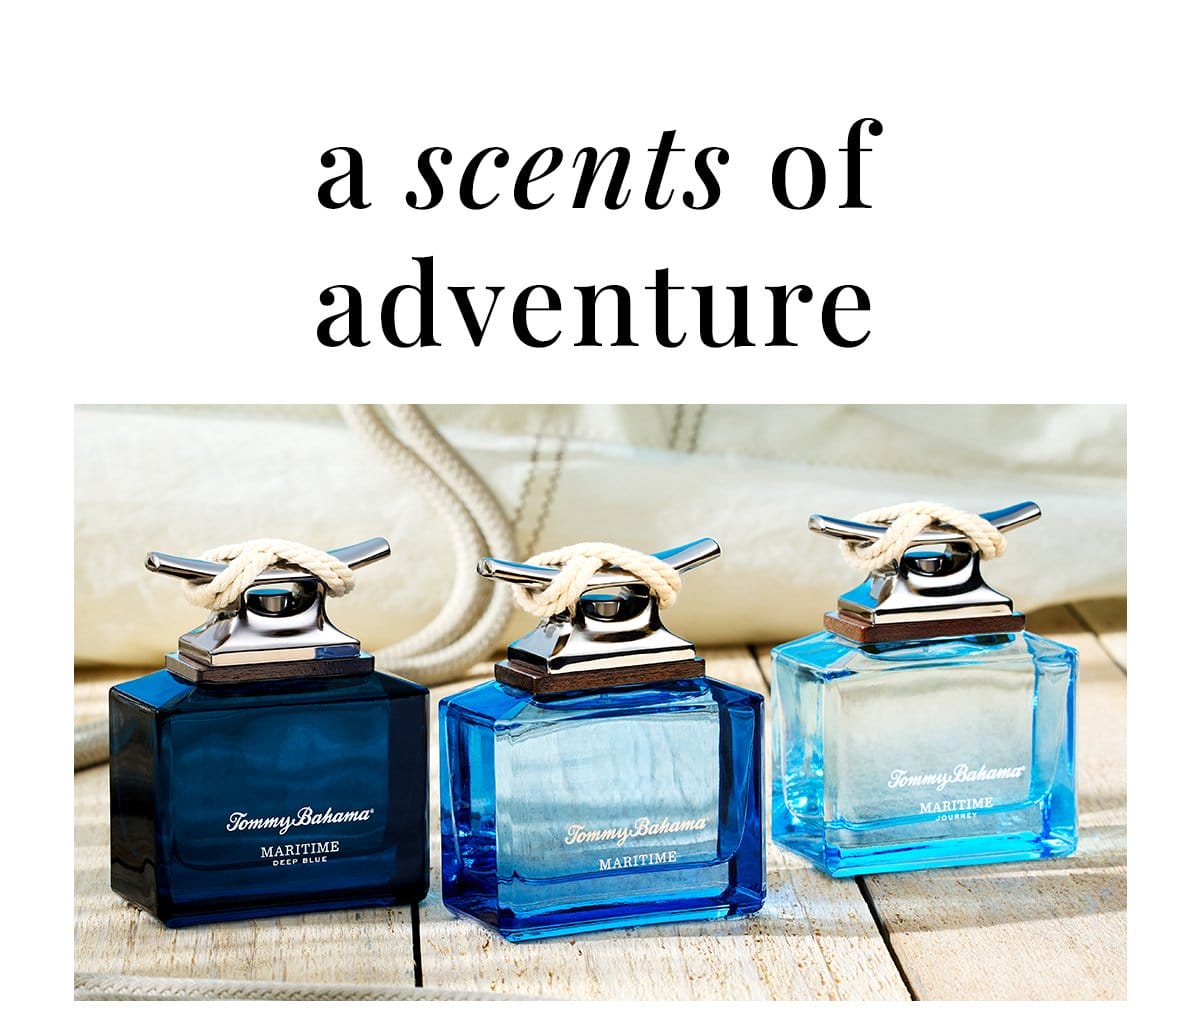 A scents of adventure